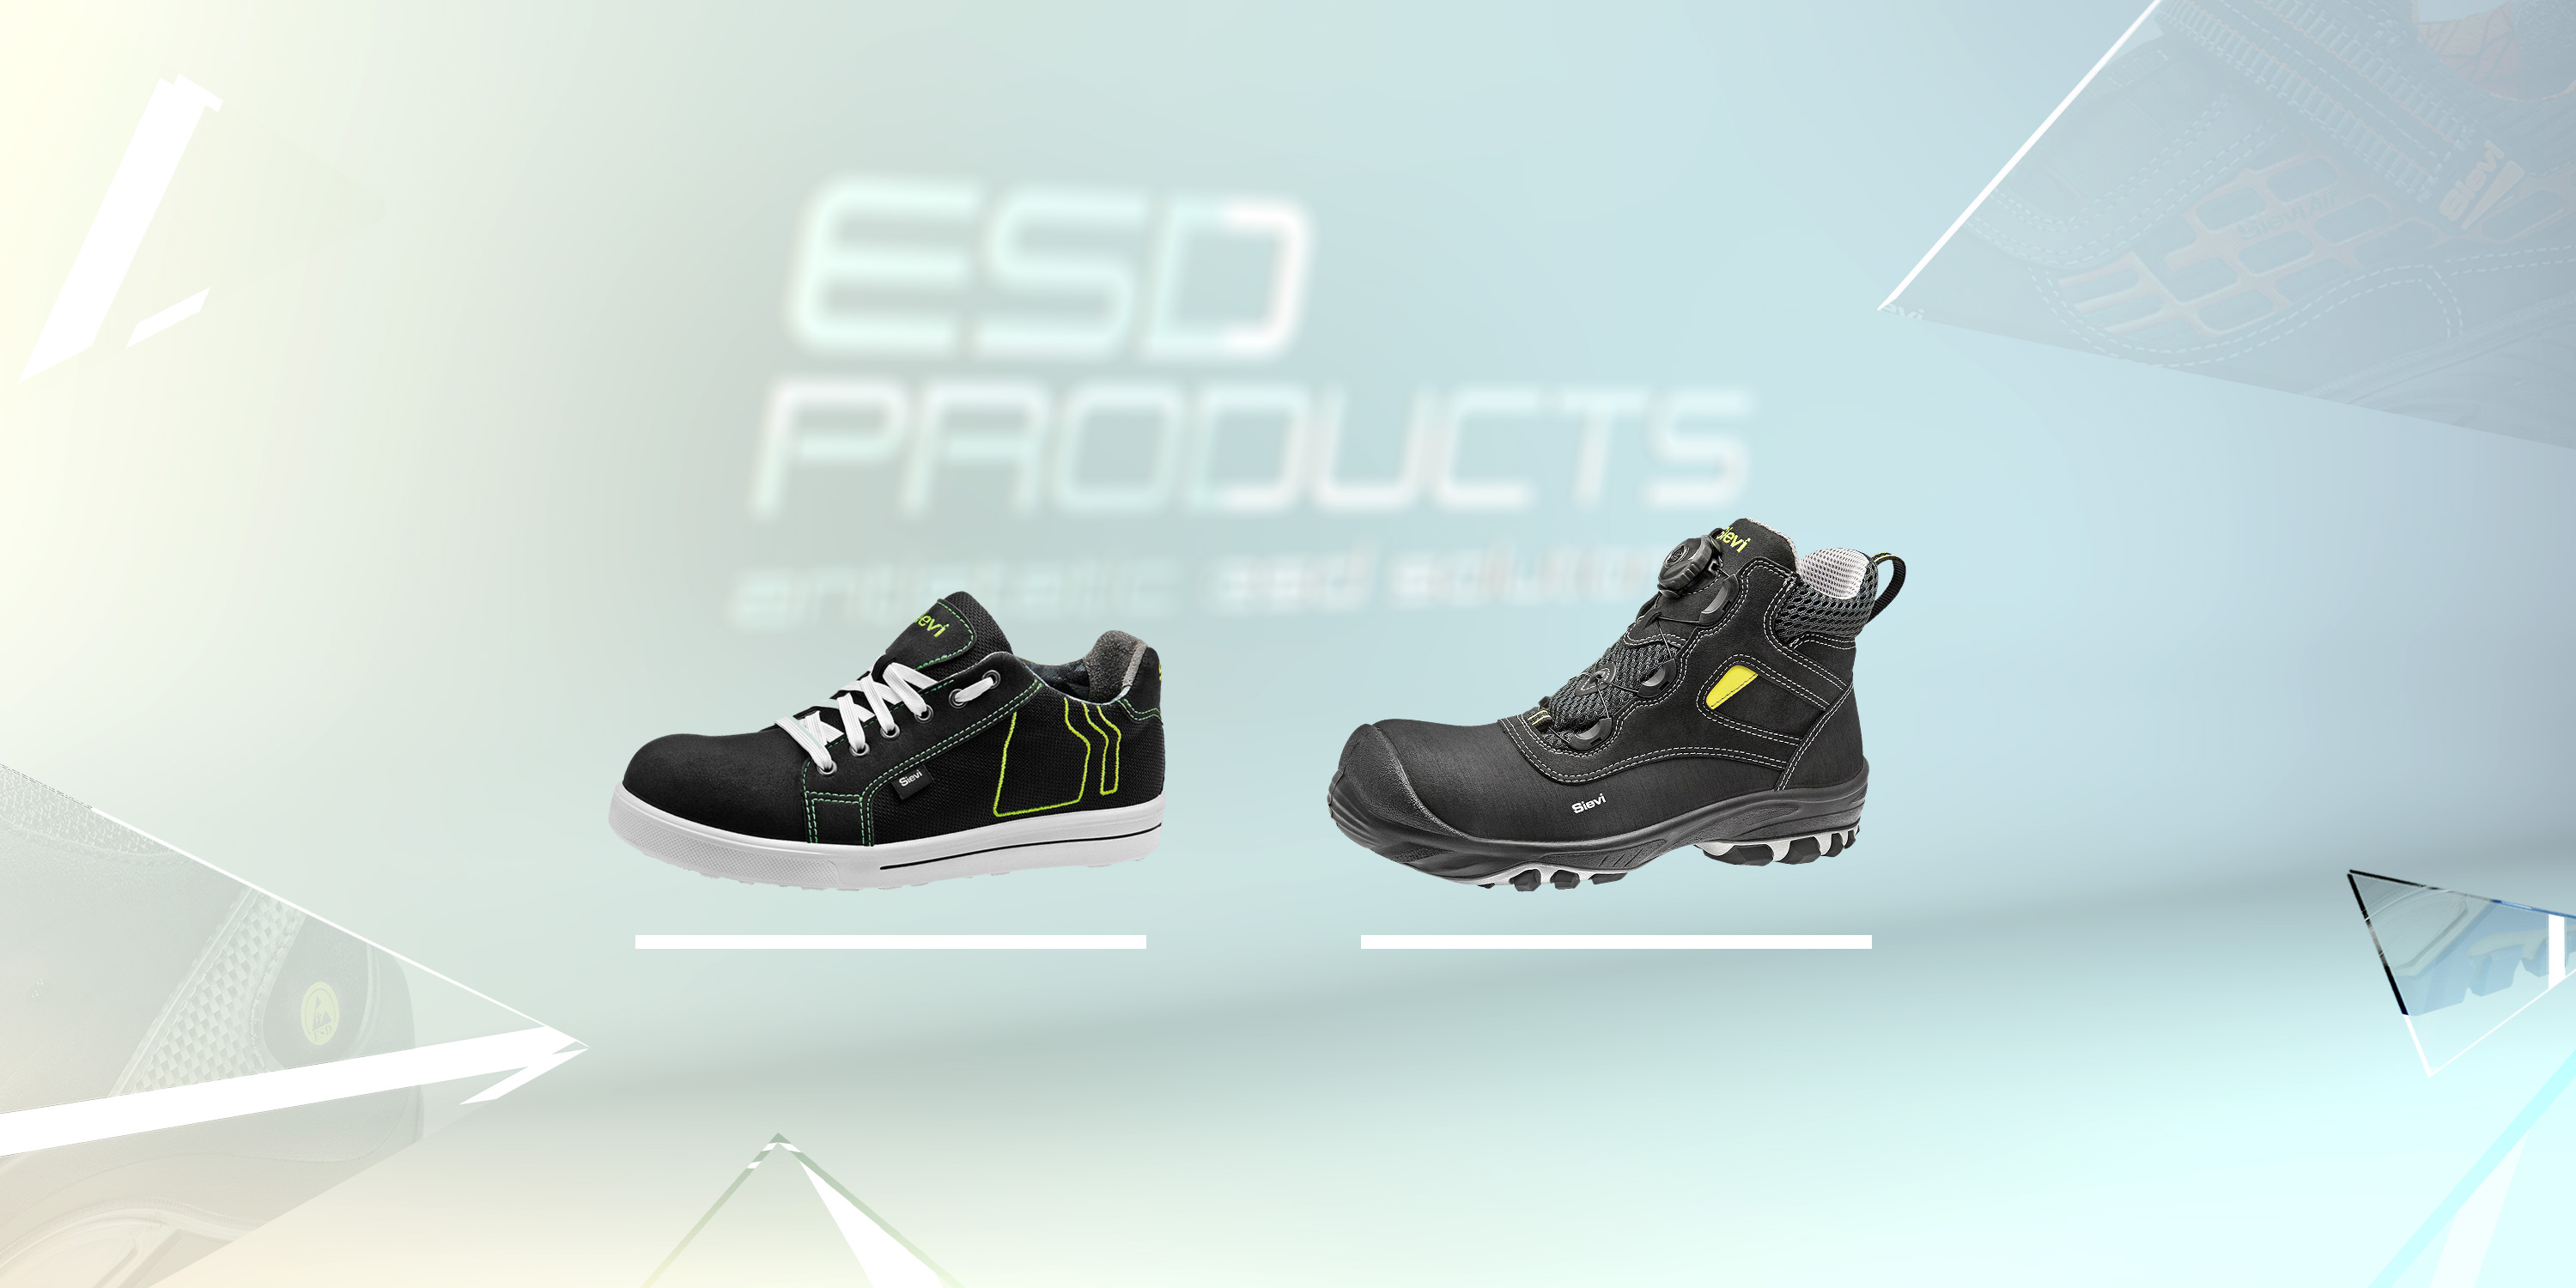 Anti-Static ESD Safety Shoes Work Protective Footwear Electric Static Dissipative Footwear Anti Static antistatic AES 